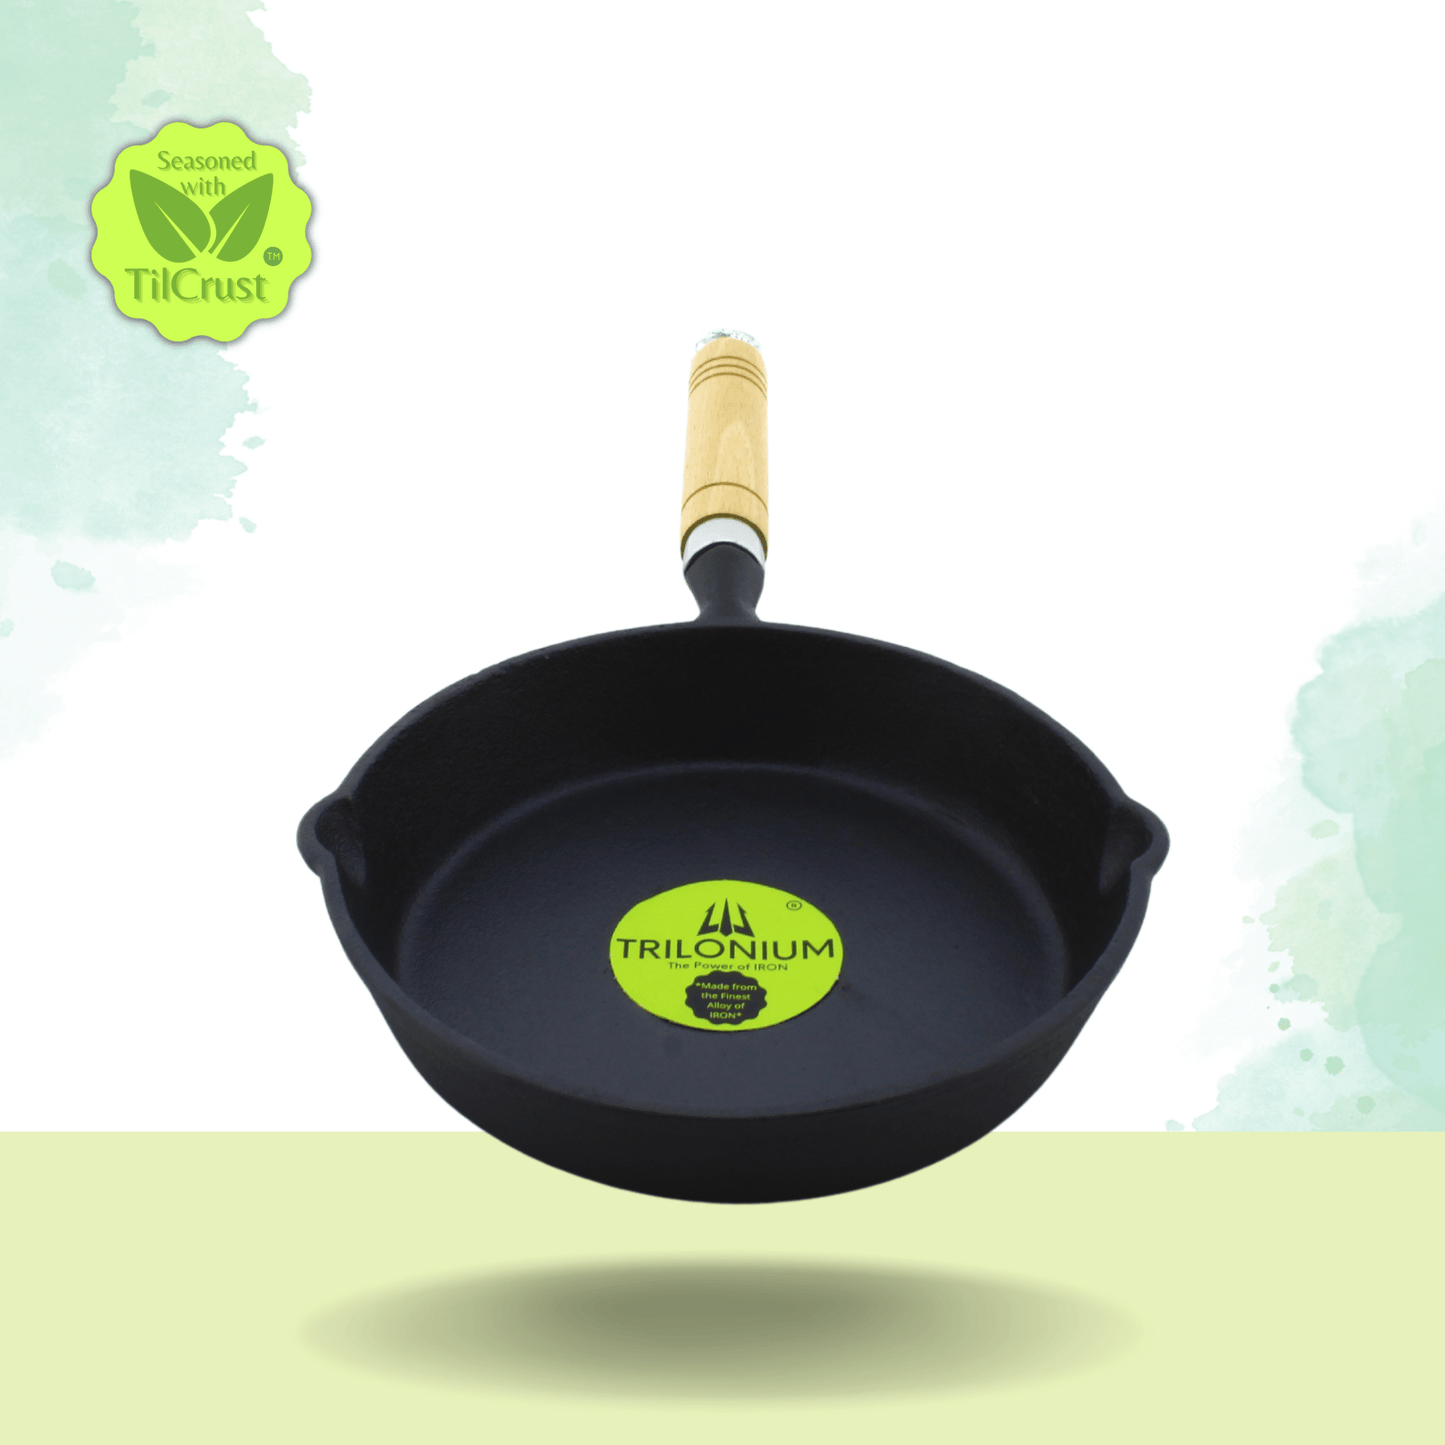 Trilonium Cast Iron Wooden handle Skillet 20 cms | Pre-Seasoned with TilCrust™ | Weighs 1.2 Kgs | Induction Compatible